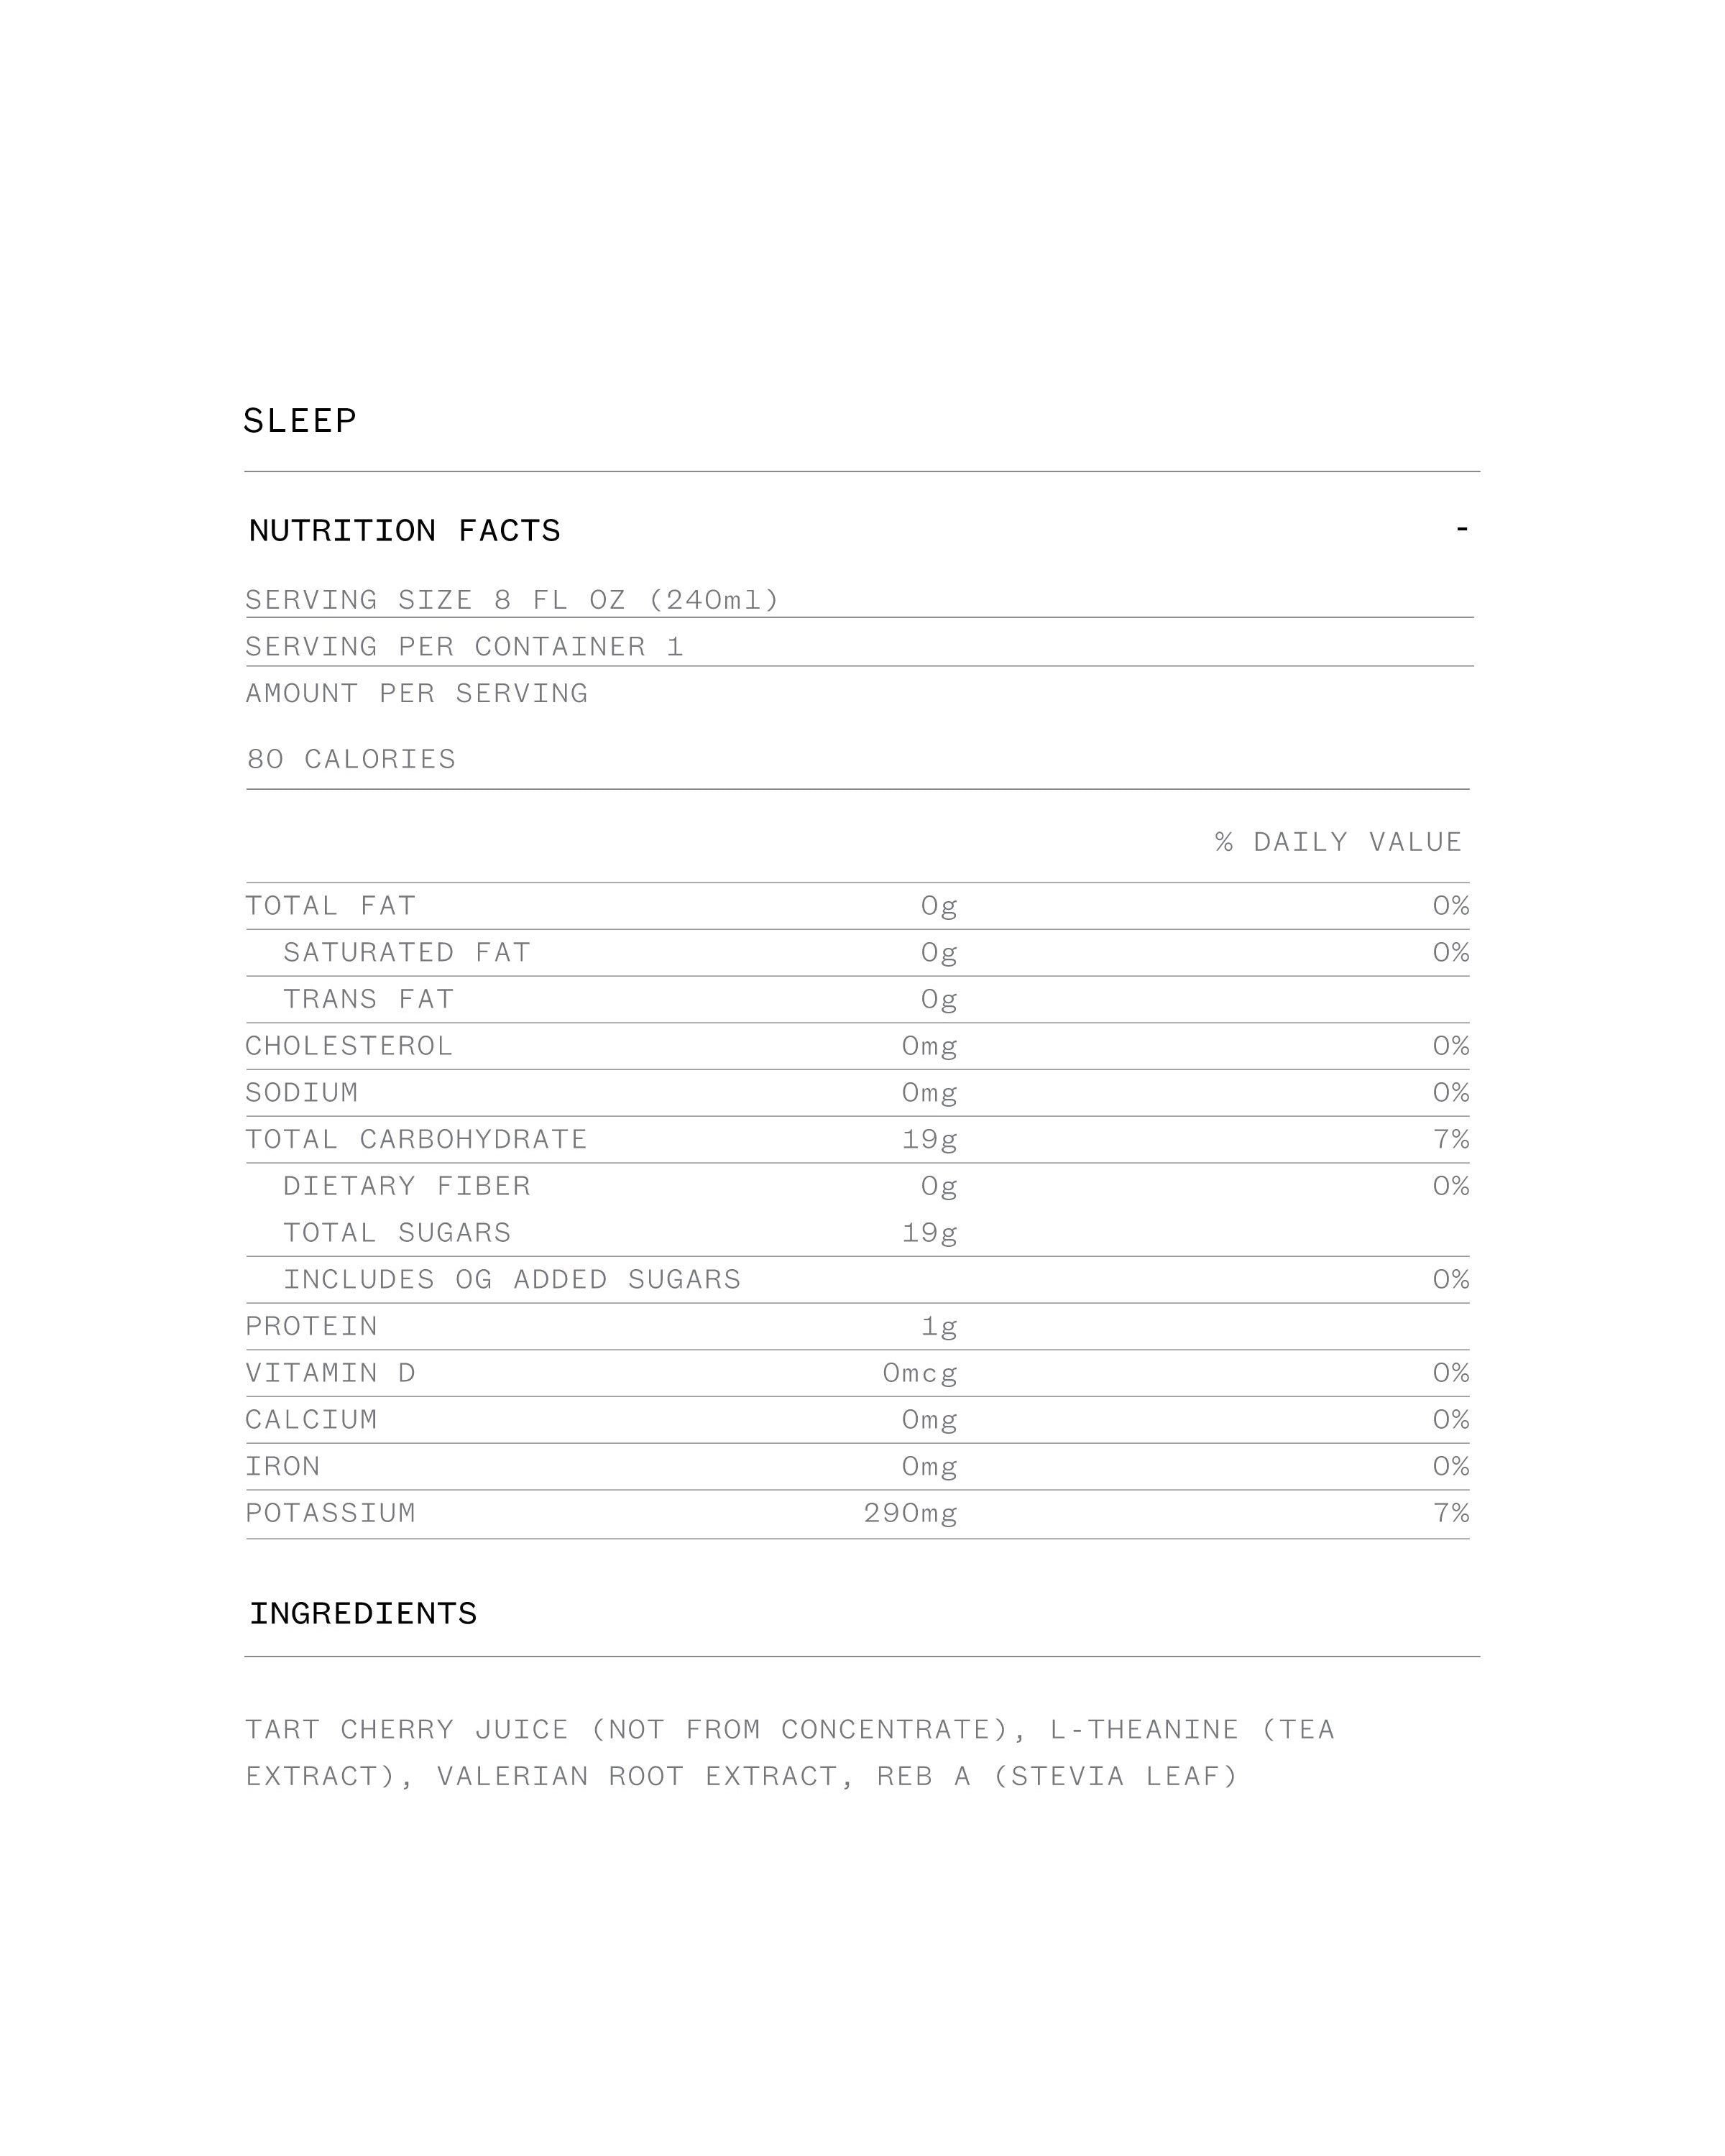 Sleep Nutrition Facts and Ingredients